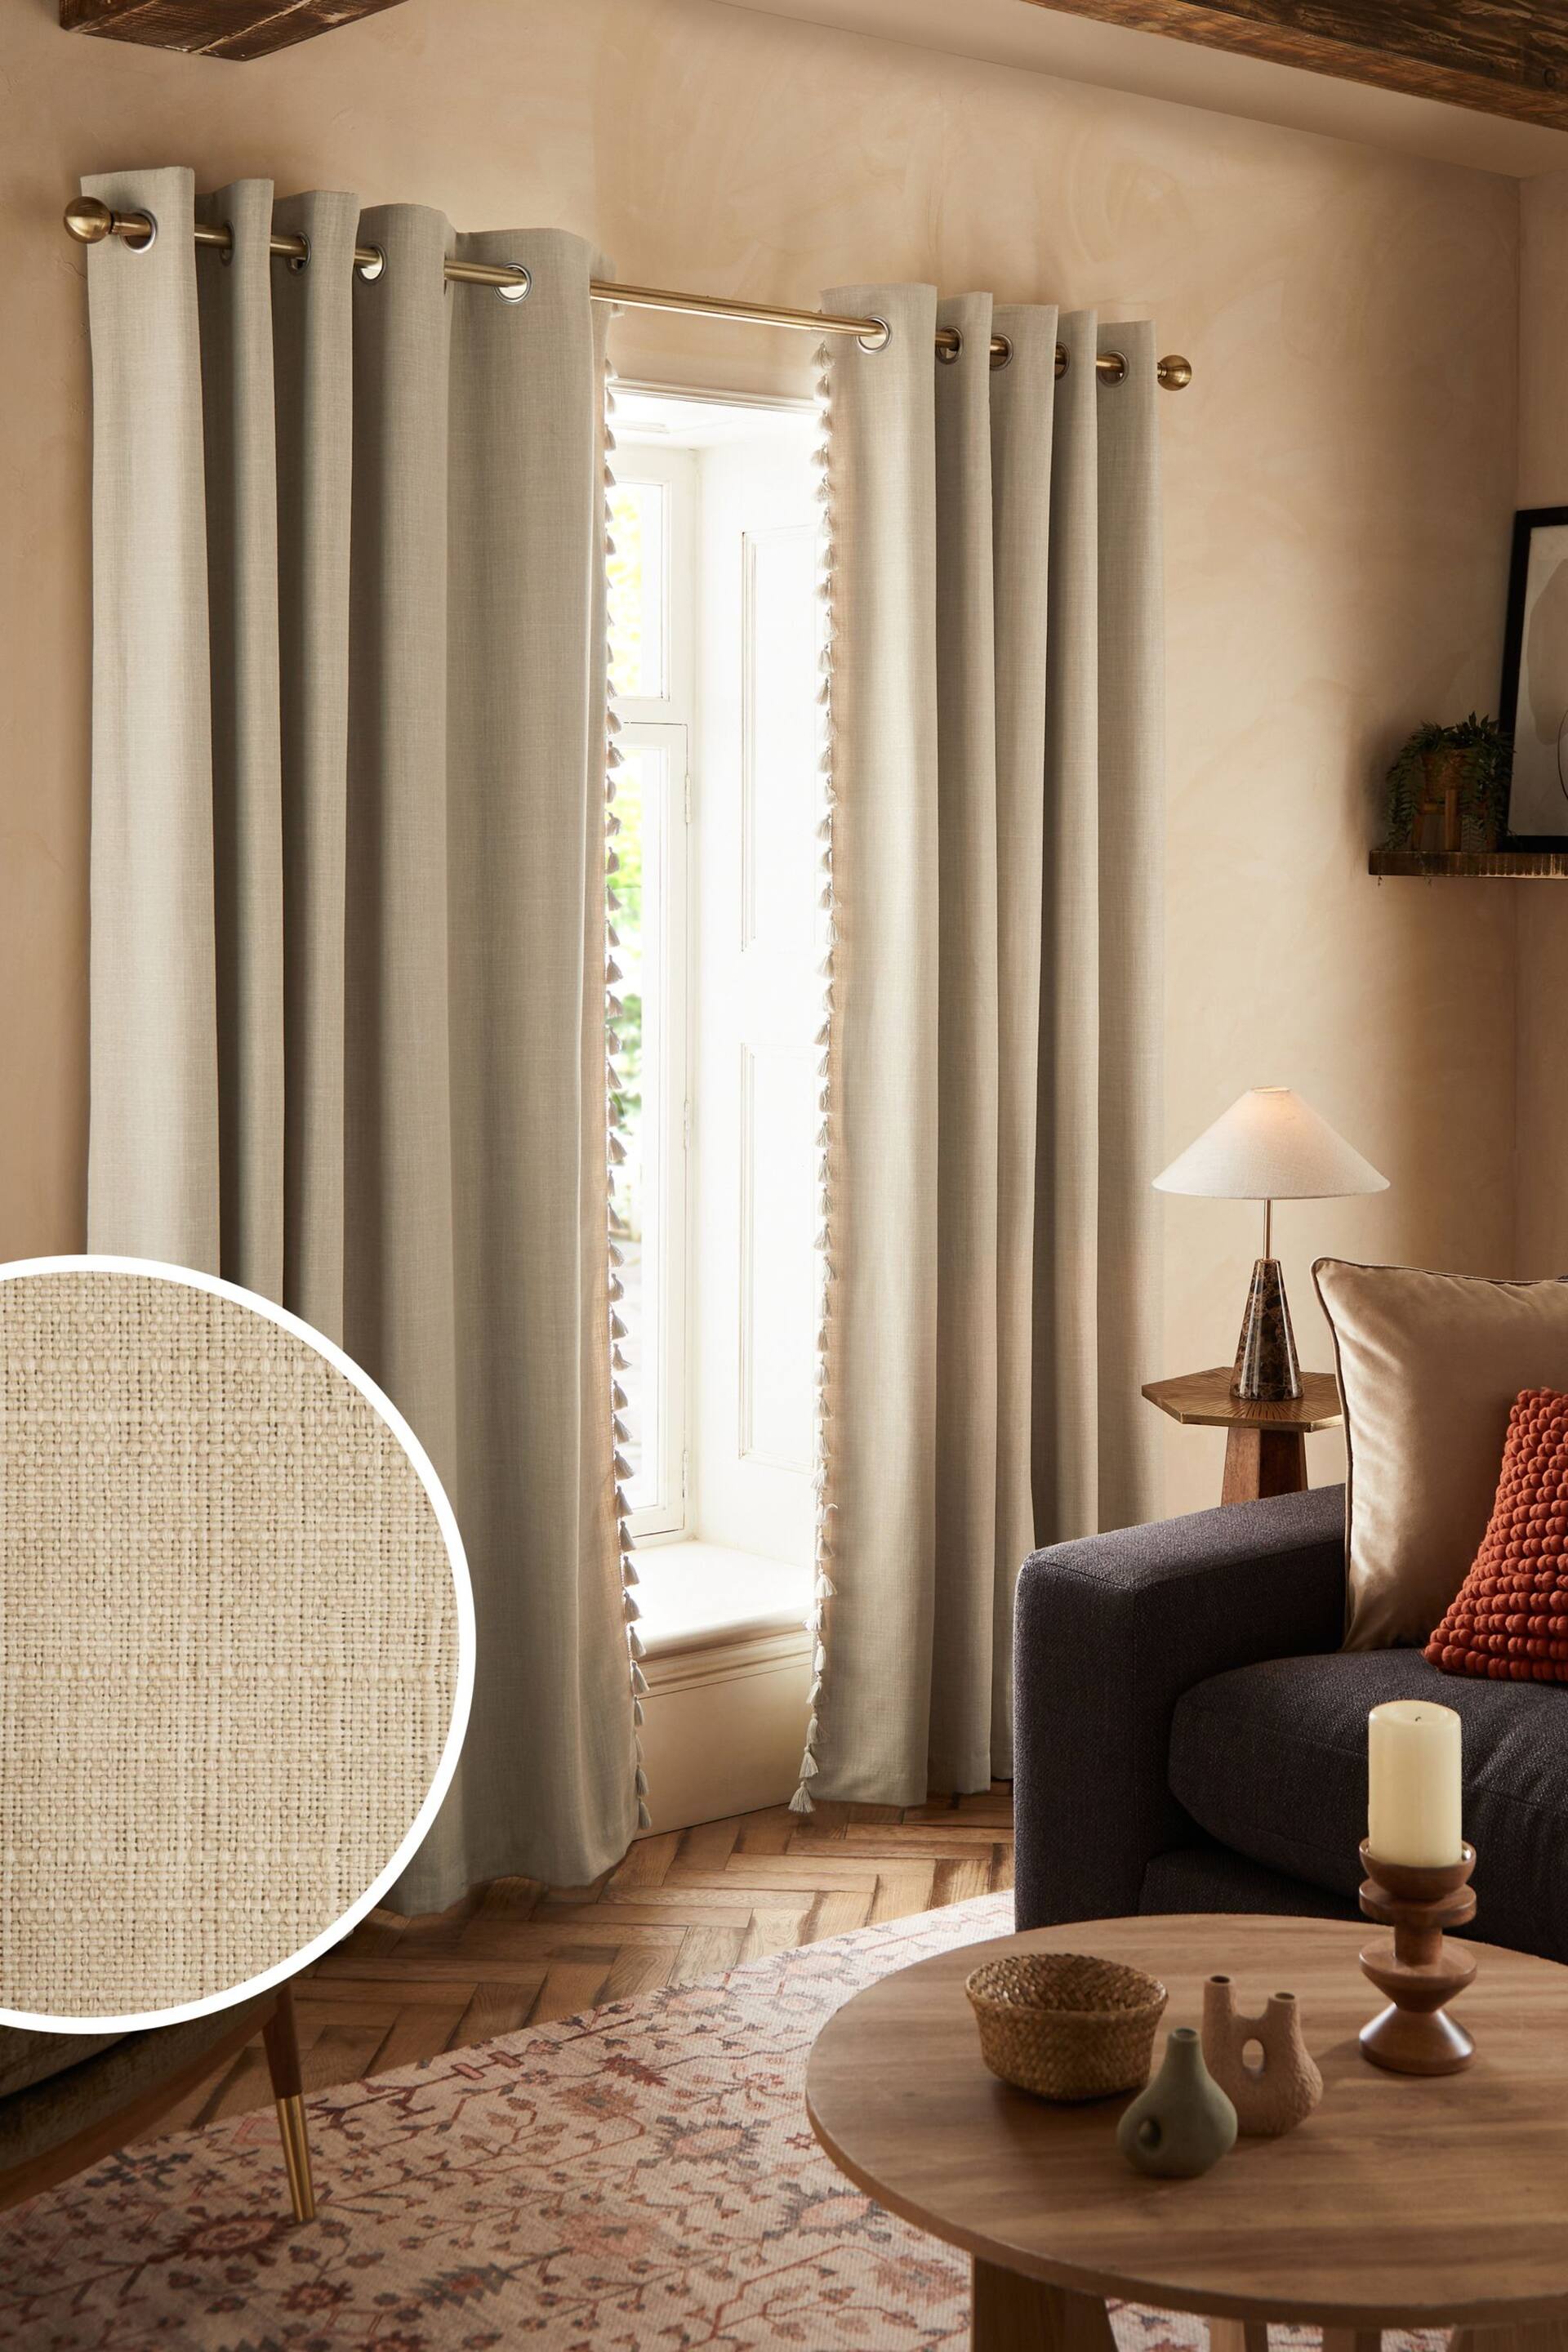 Light Natural Next Textured Tassel Edge Eyelet Blackout/Thermal Curtains - Image 1 of 7